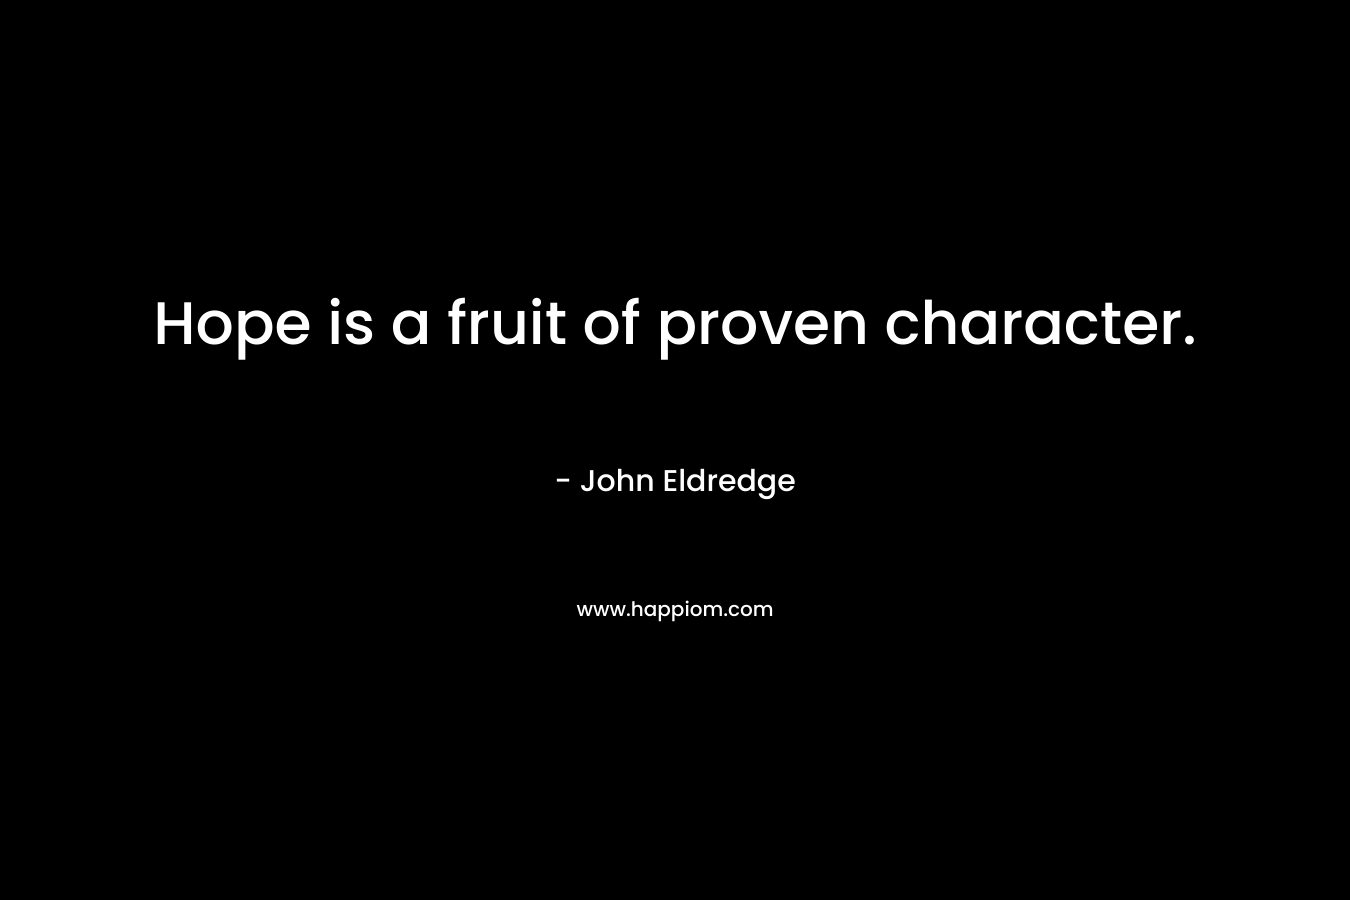 Hope is a fruit of proven character.